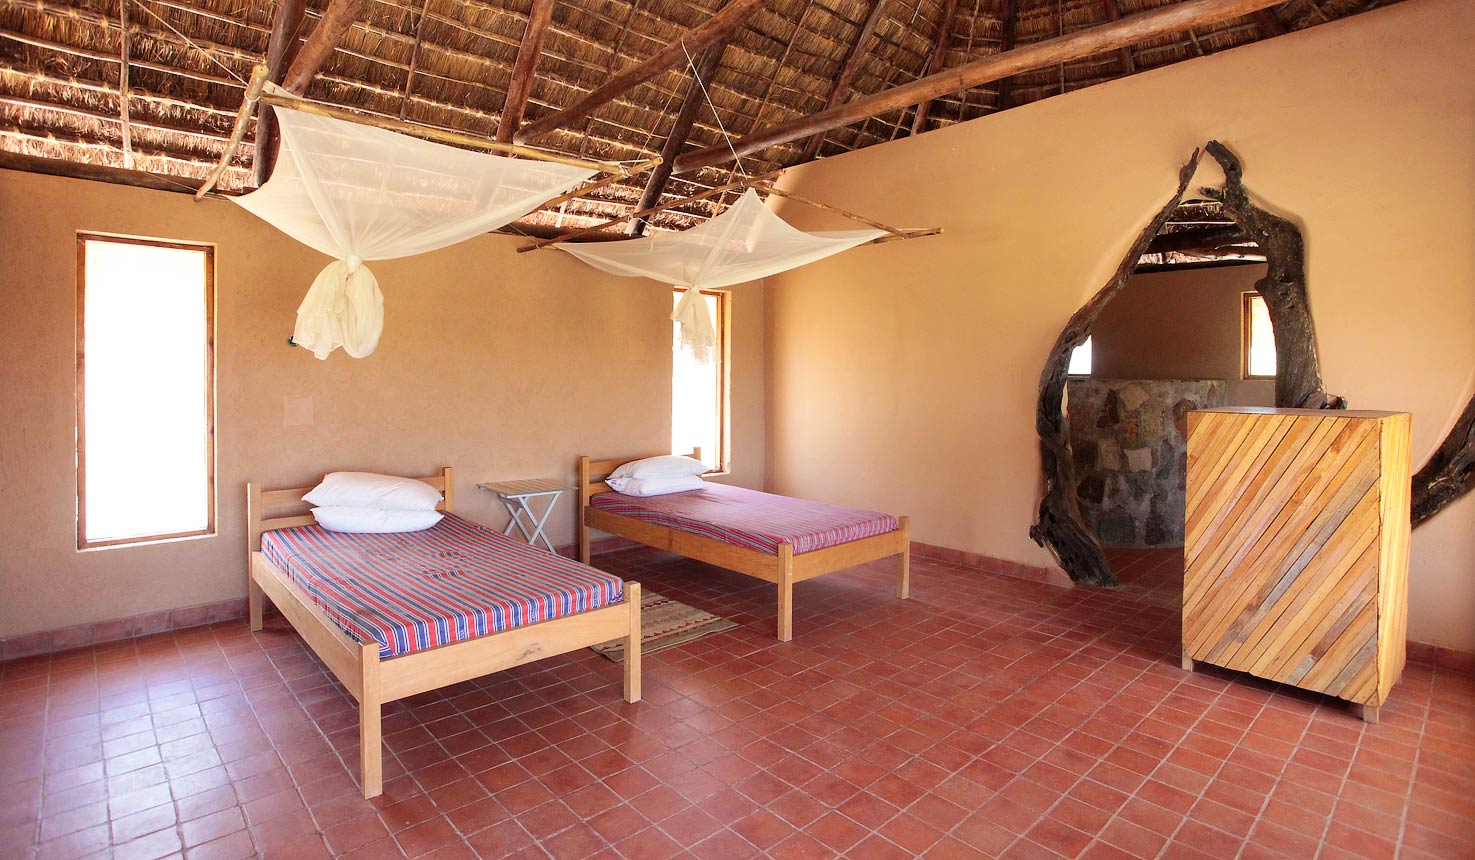 Accommodation in Kidepo valley national park